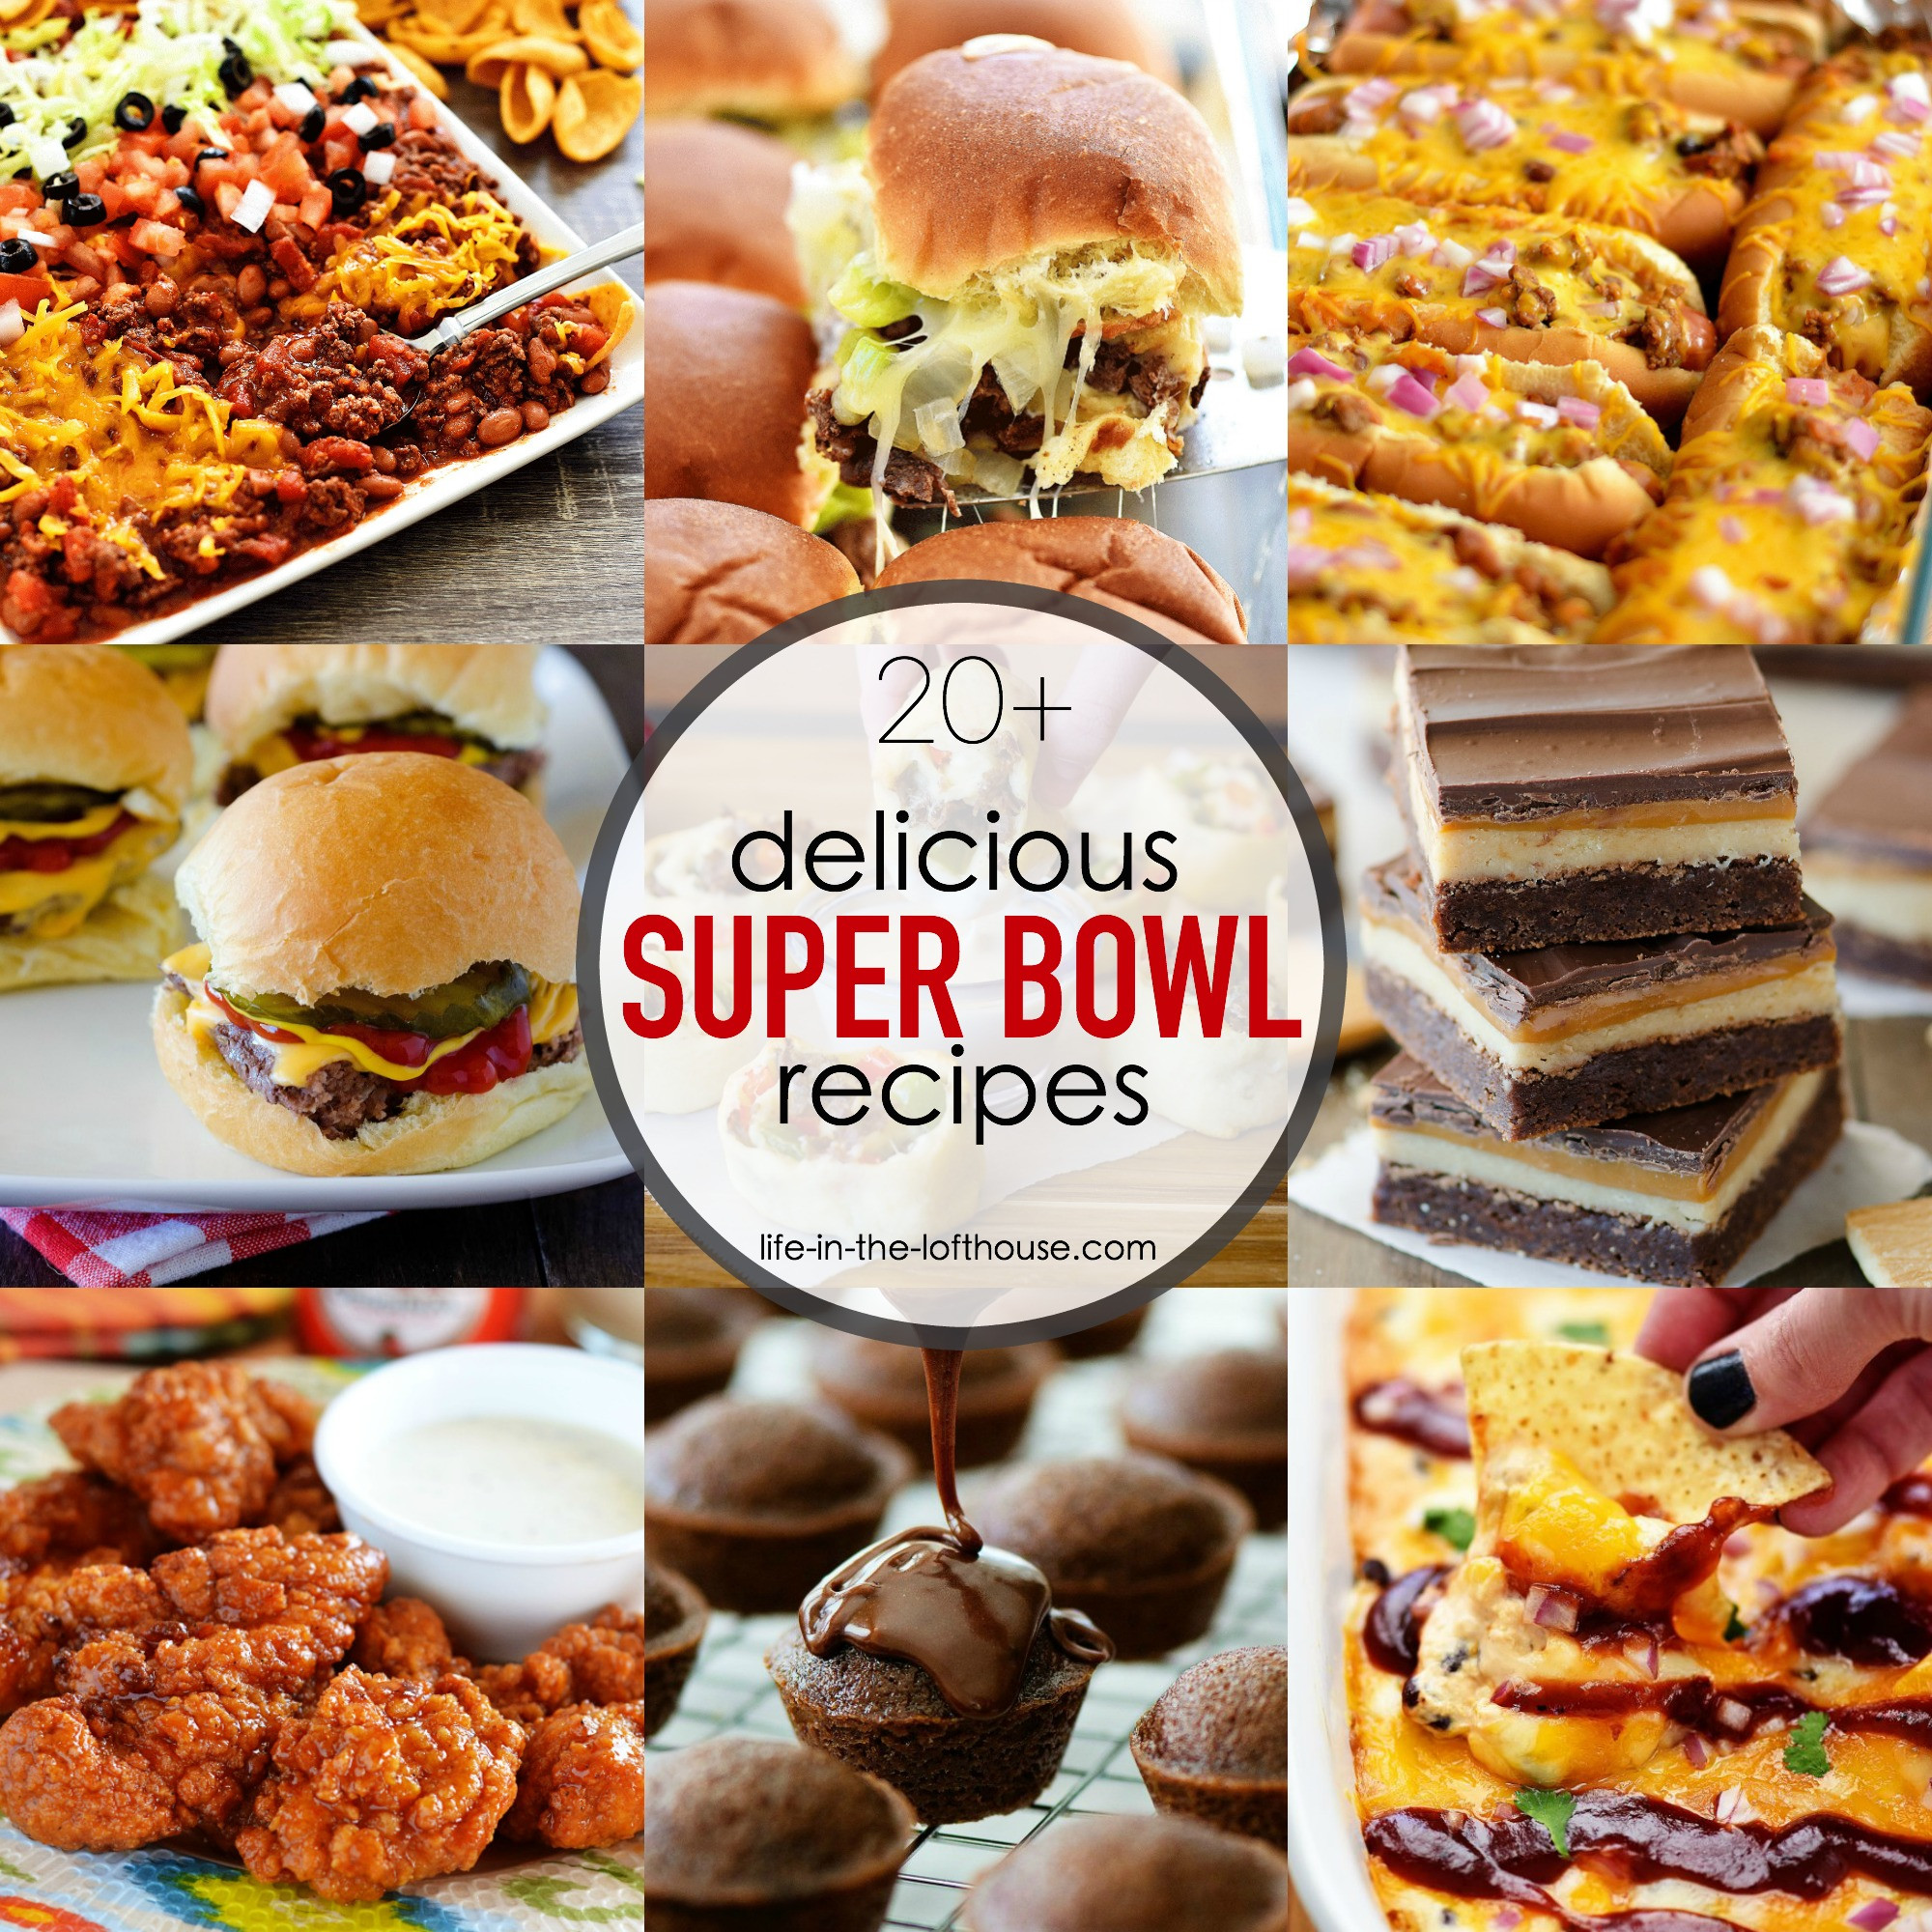 Recipes For The Super Bowl
 20 Super Bowl Recipes Life In The Lofthouse